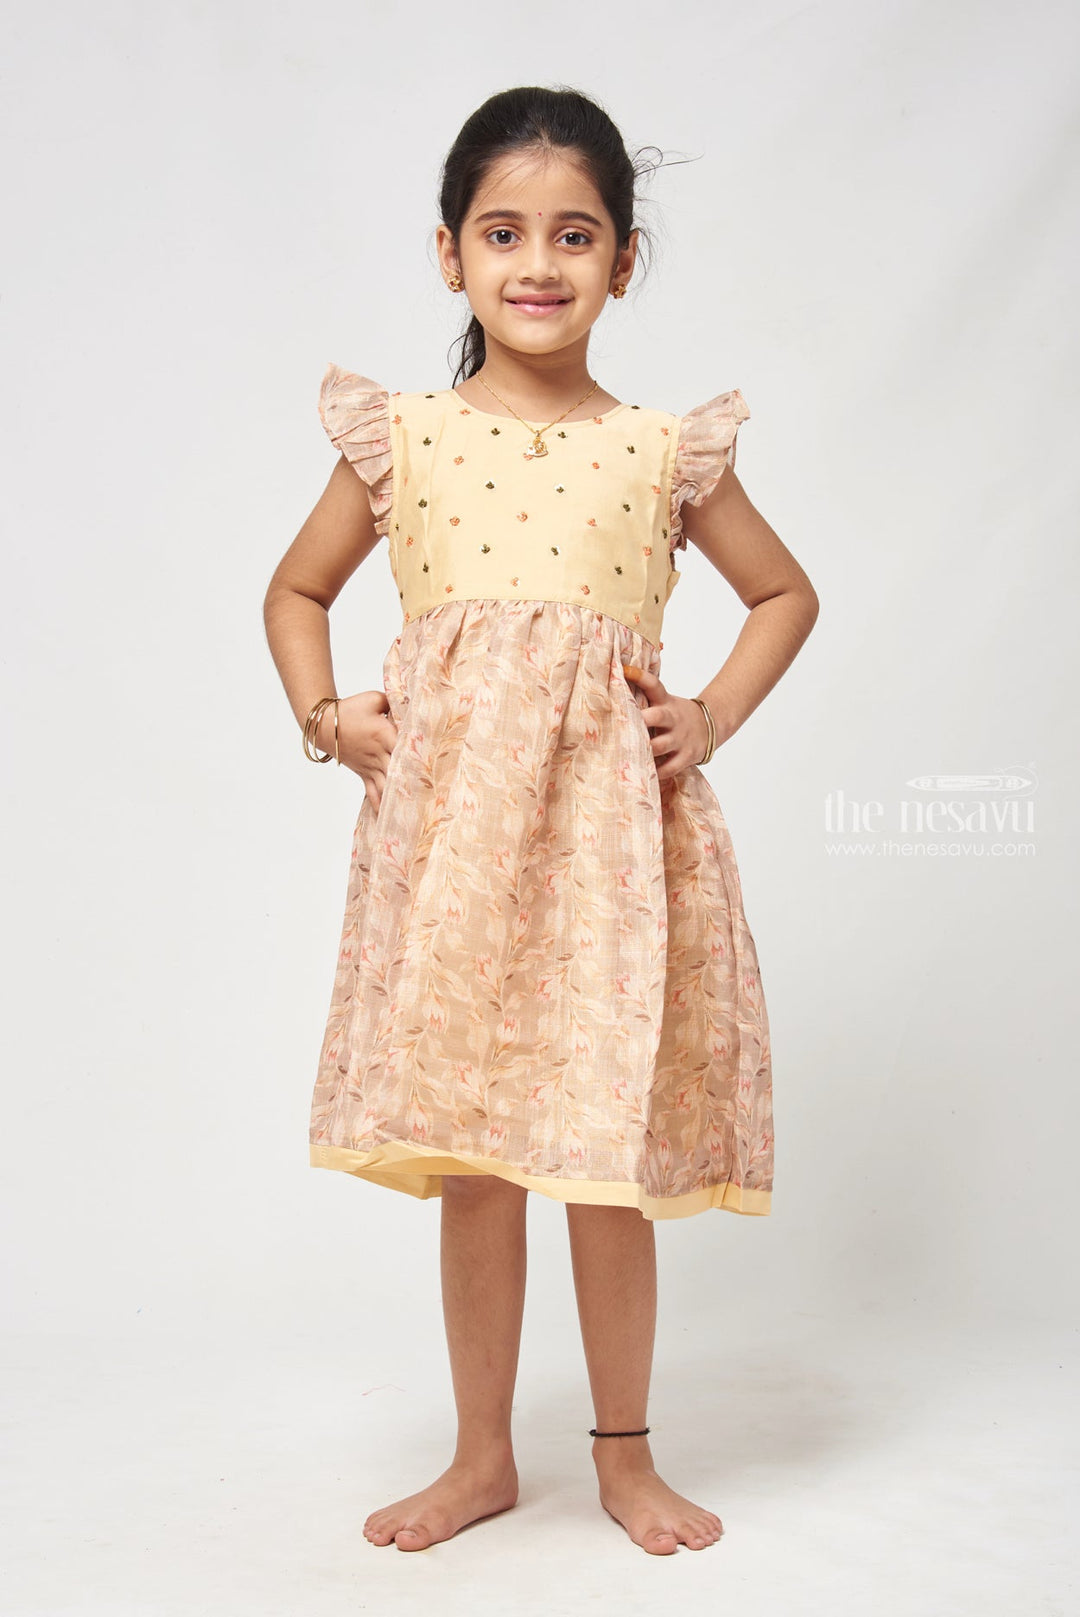 The Nesavu Girls Cotton Frock Brown Chanderi Cotton Frock with Floral Print - Ethnic Girls Attire Nesavu 16 (1Y) / Beige / Chanderi GFC1115A-16 Cotton Frock For Baby Girl | Western Cotton Frocks | The Nesavu